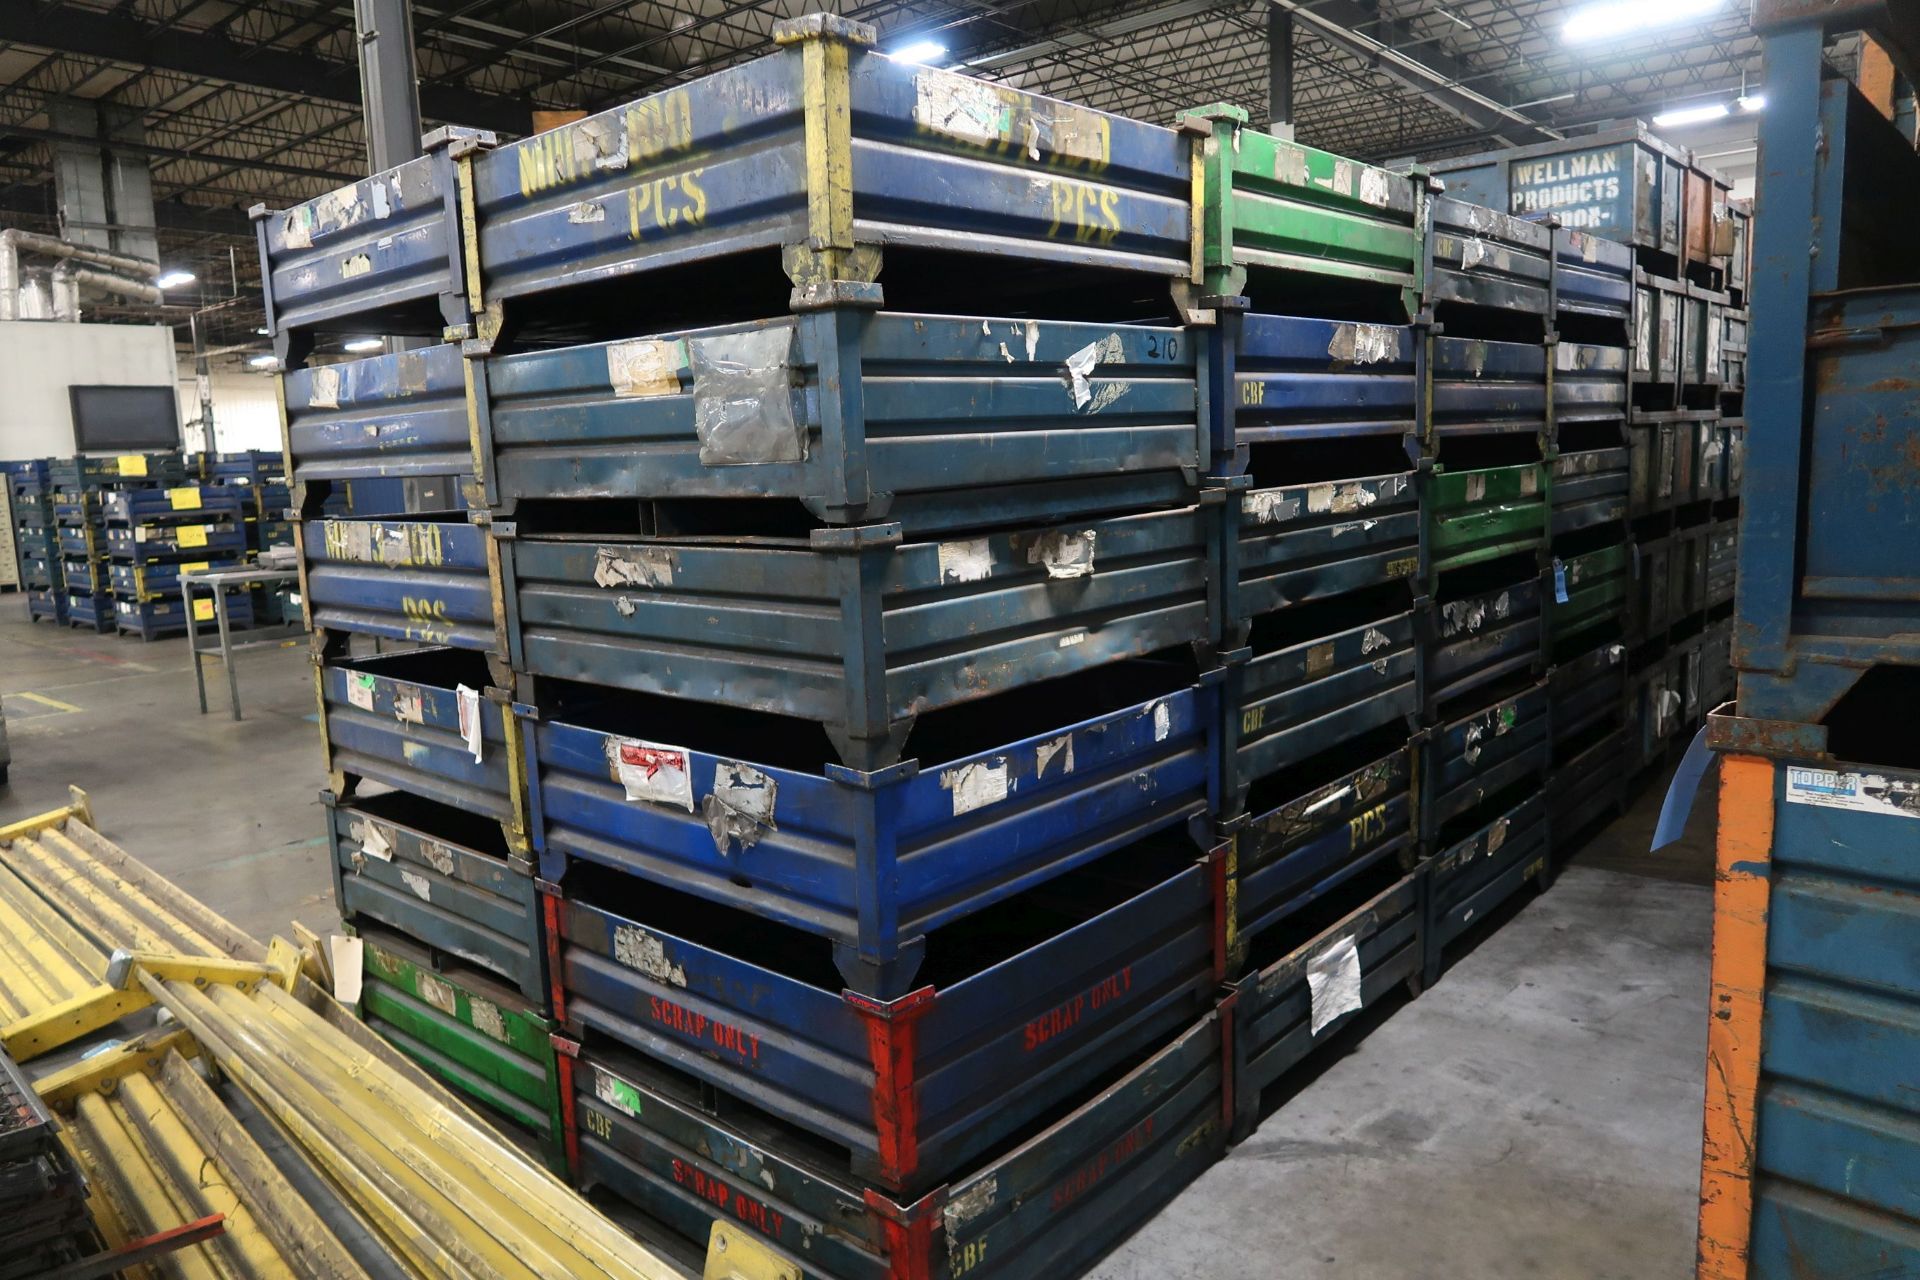 45" x 45" x 10" DEEP STACKABLE STEEL TUBS **LOADING PRICE DUE TO ERRA - $300.00**